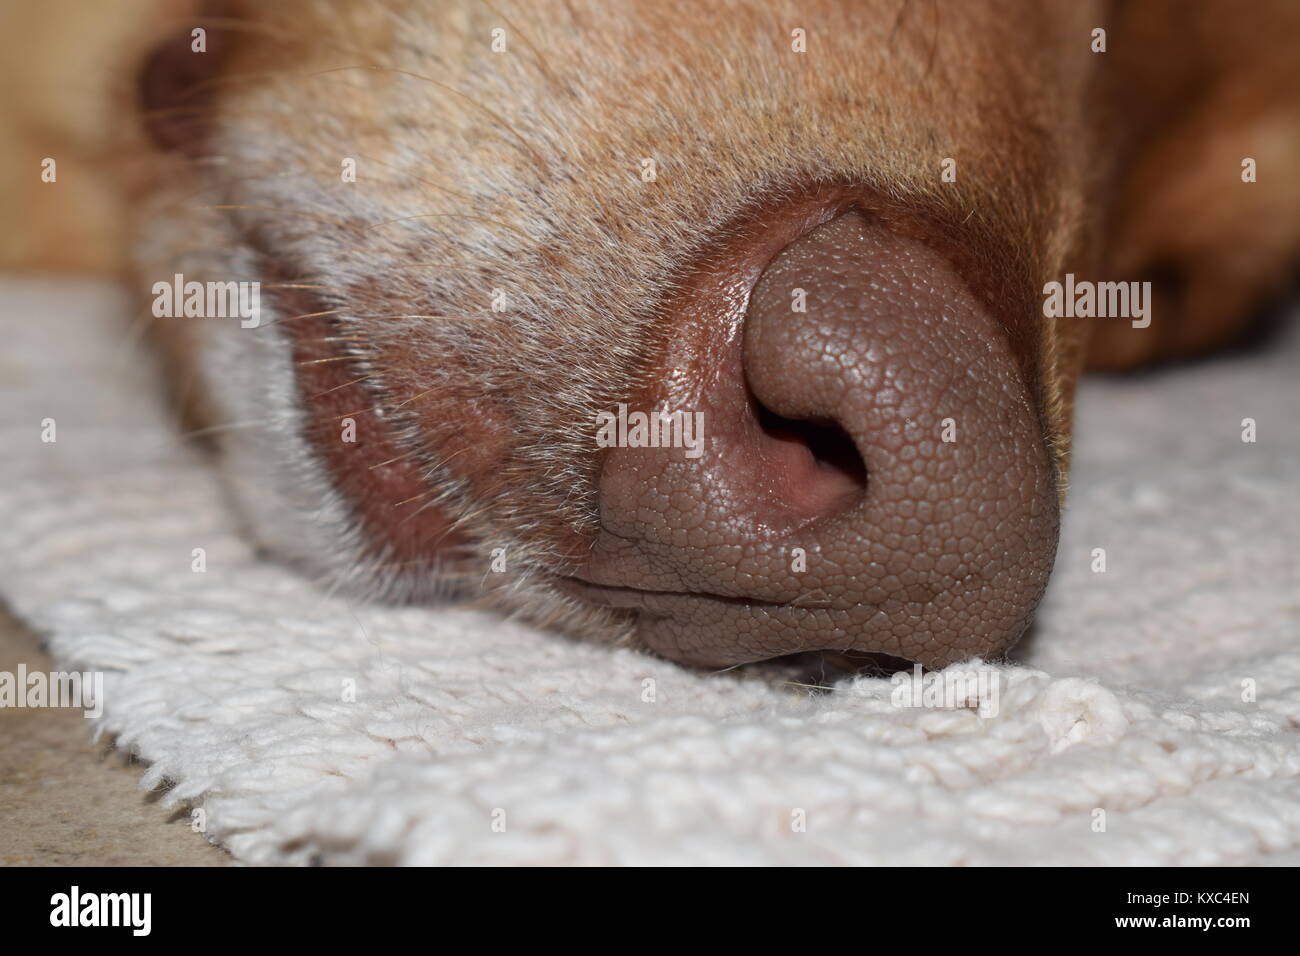 Close up of the dog nose Stock Photo